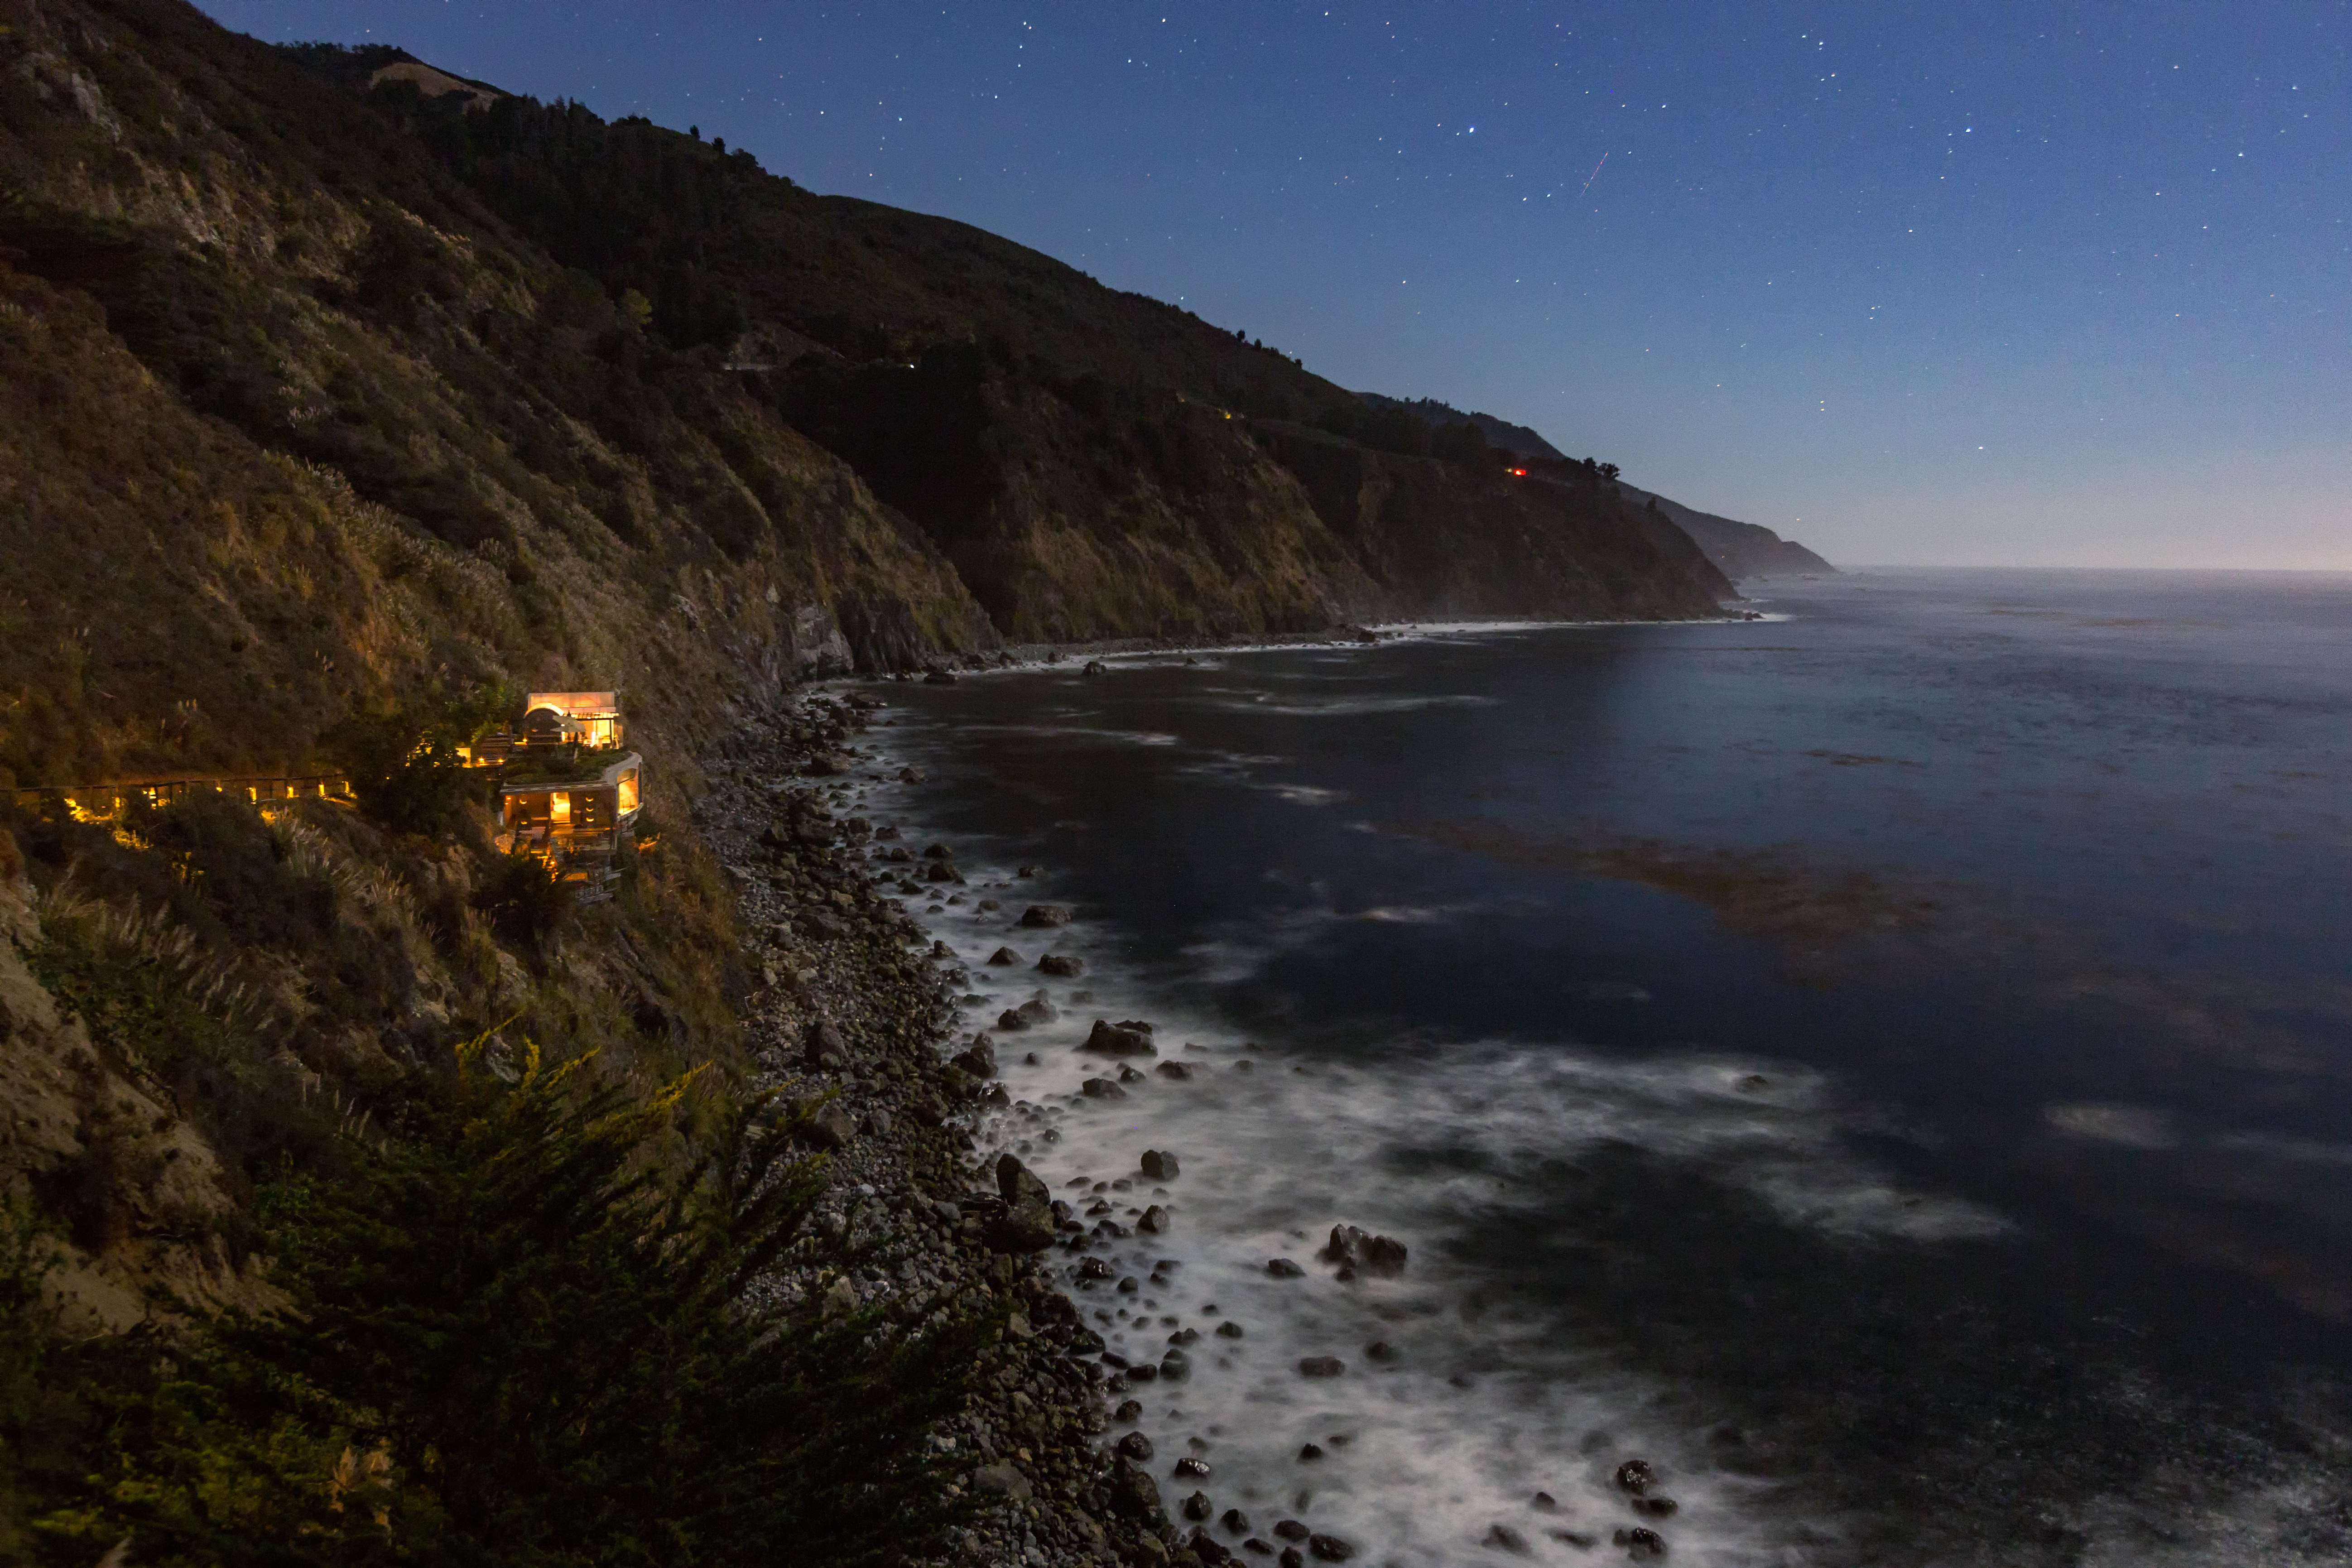 The cliffs at night, and the baths glowing on the edge of the cliffs